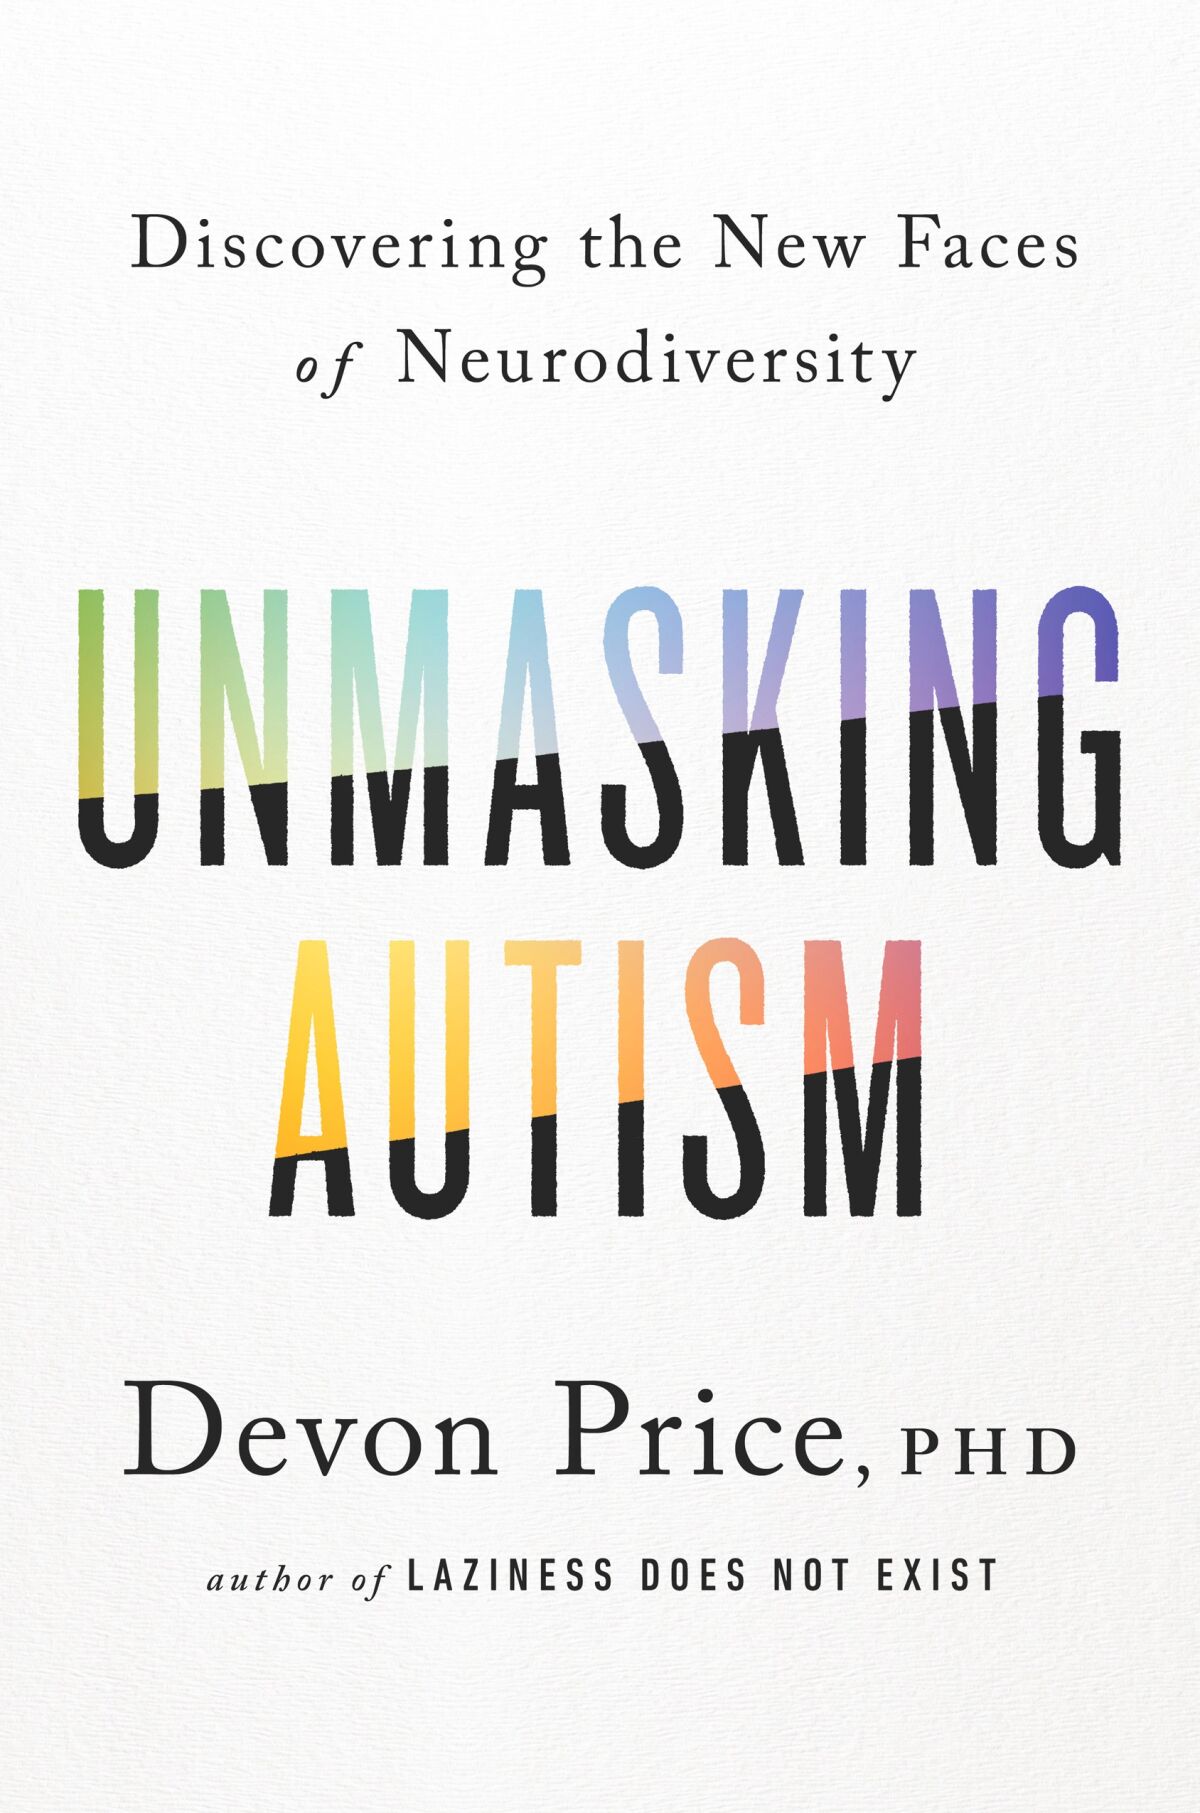 The book cover for "Unmasking Autism: Discovering the New Faces of Neeurodiversity" by Devon Price